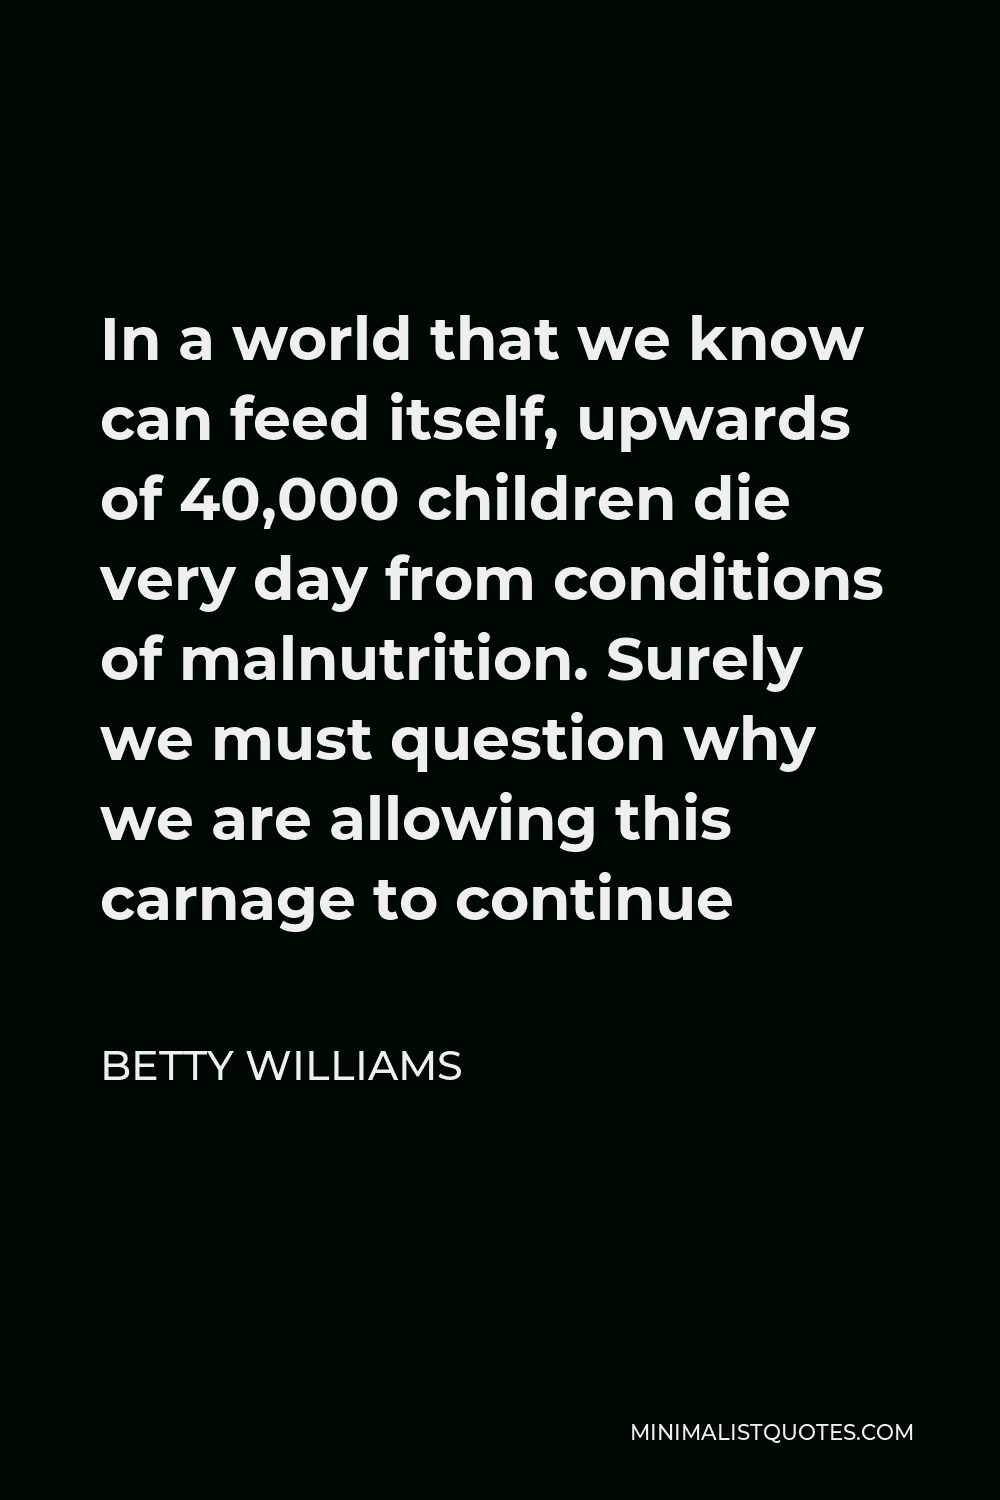 Betty Williams Quote - In a world that we know can feed itself, upwards of 40,000 children die very day from conditions of malnutrition. Surely we must question why we are allowing this carnage to continue